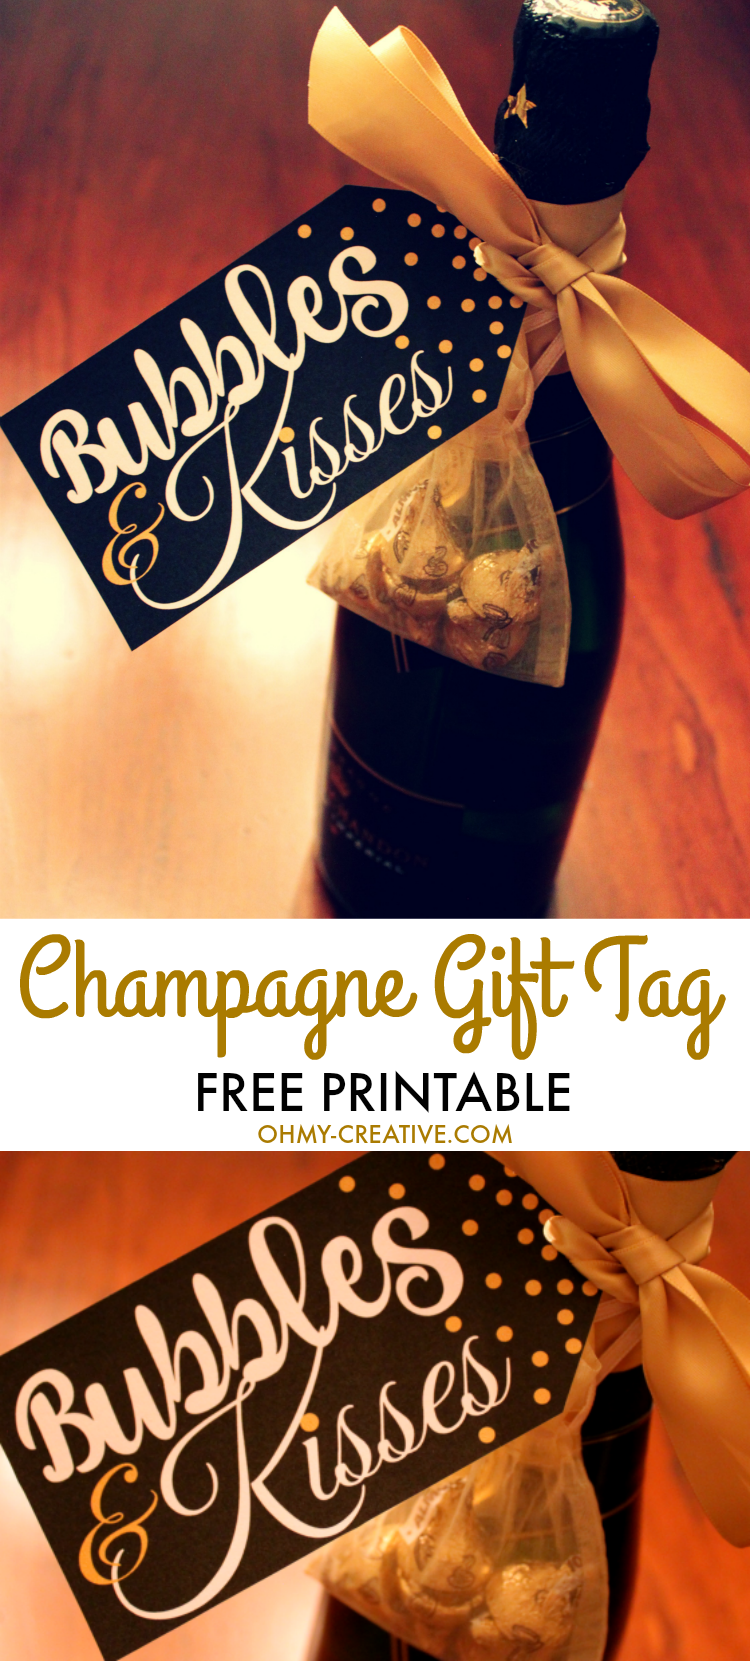 From New Year's Eve, Weddings or any celebration, grab this Bubbles and Kisses Champagne and Chocolate FREE Printable Gift Tag to add to your champagne bottle! | OHMY-CREATIVE.COM